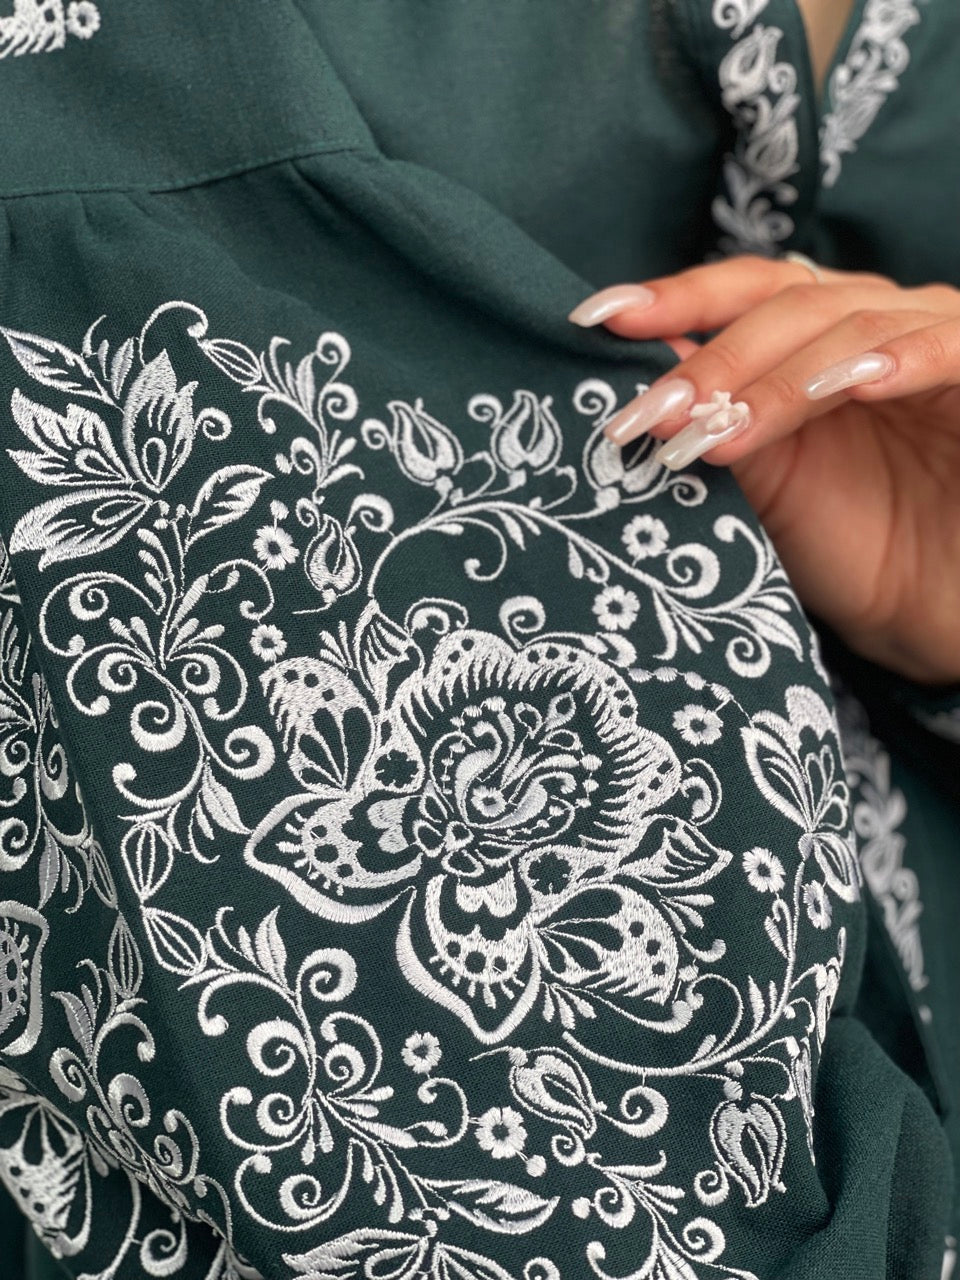 The Green Dress with White Embroidery